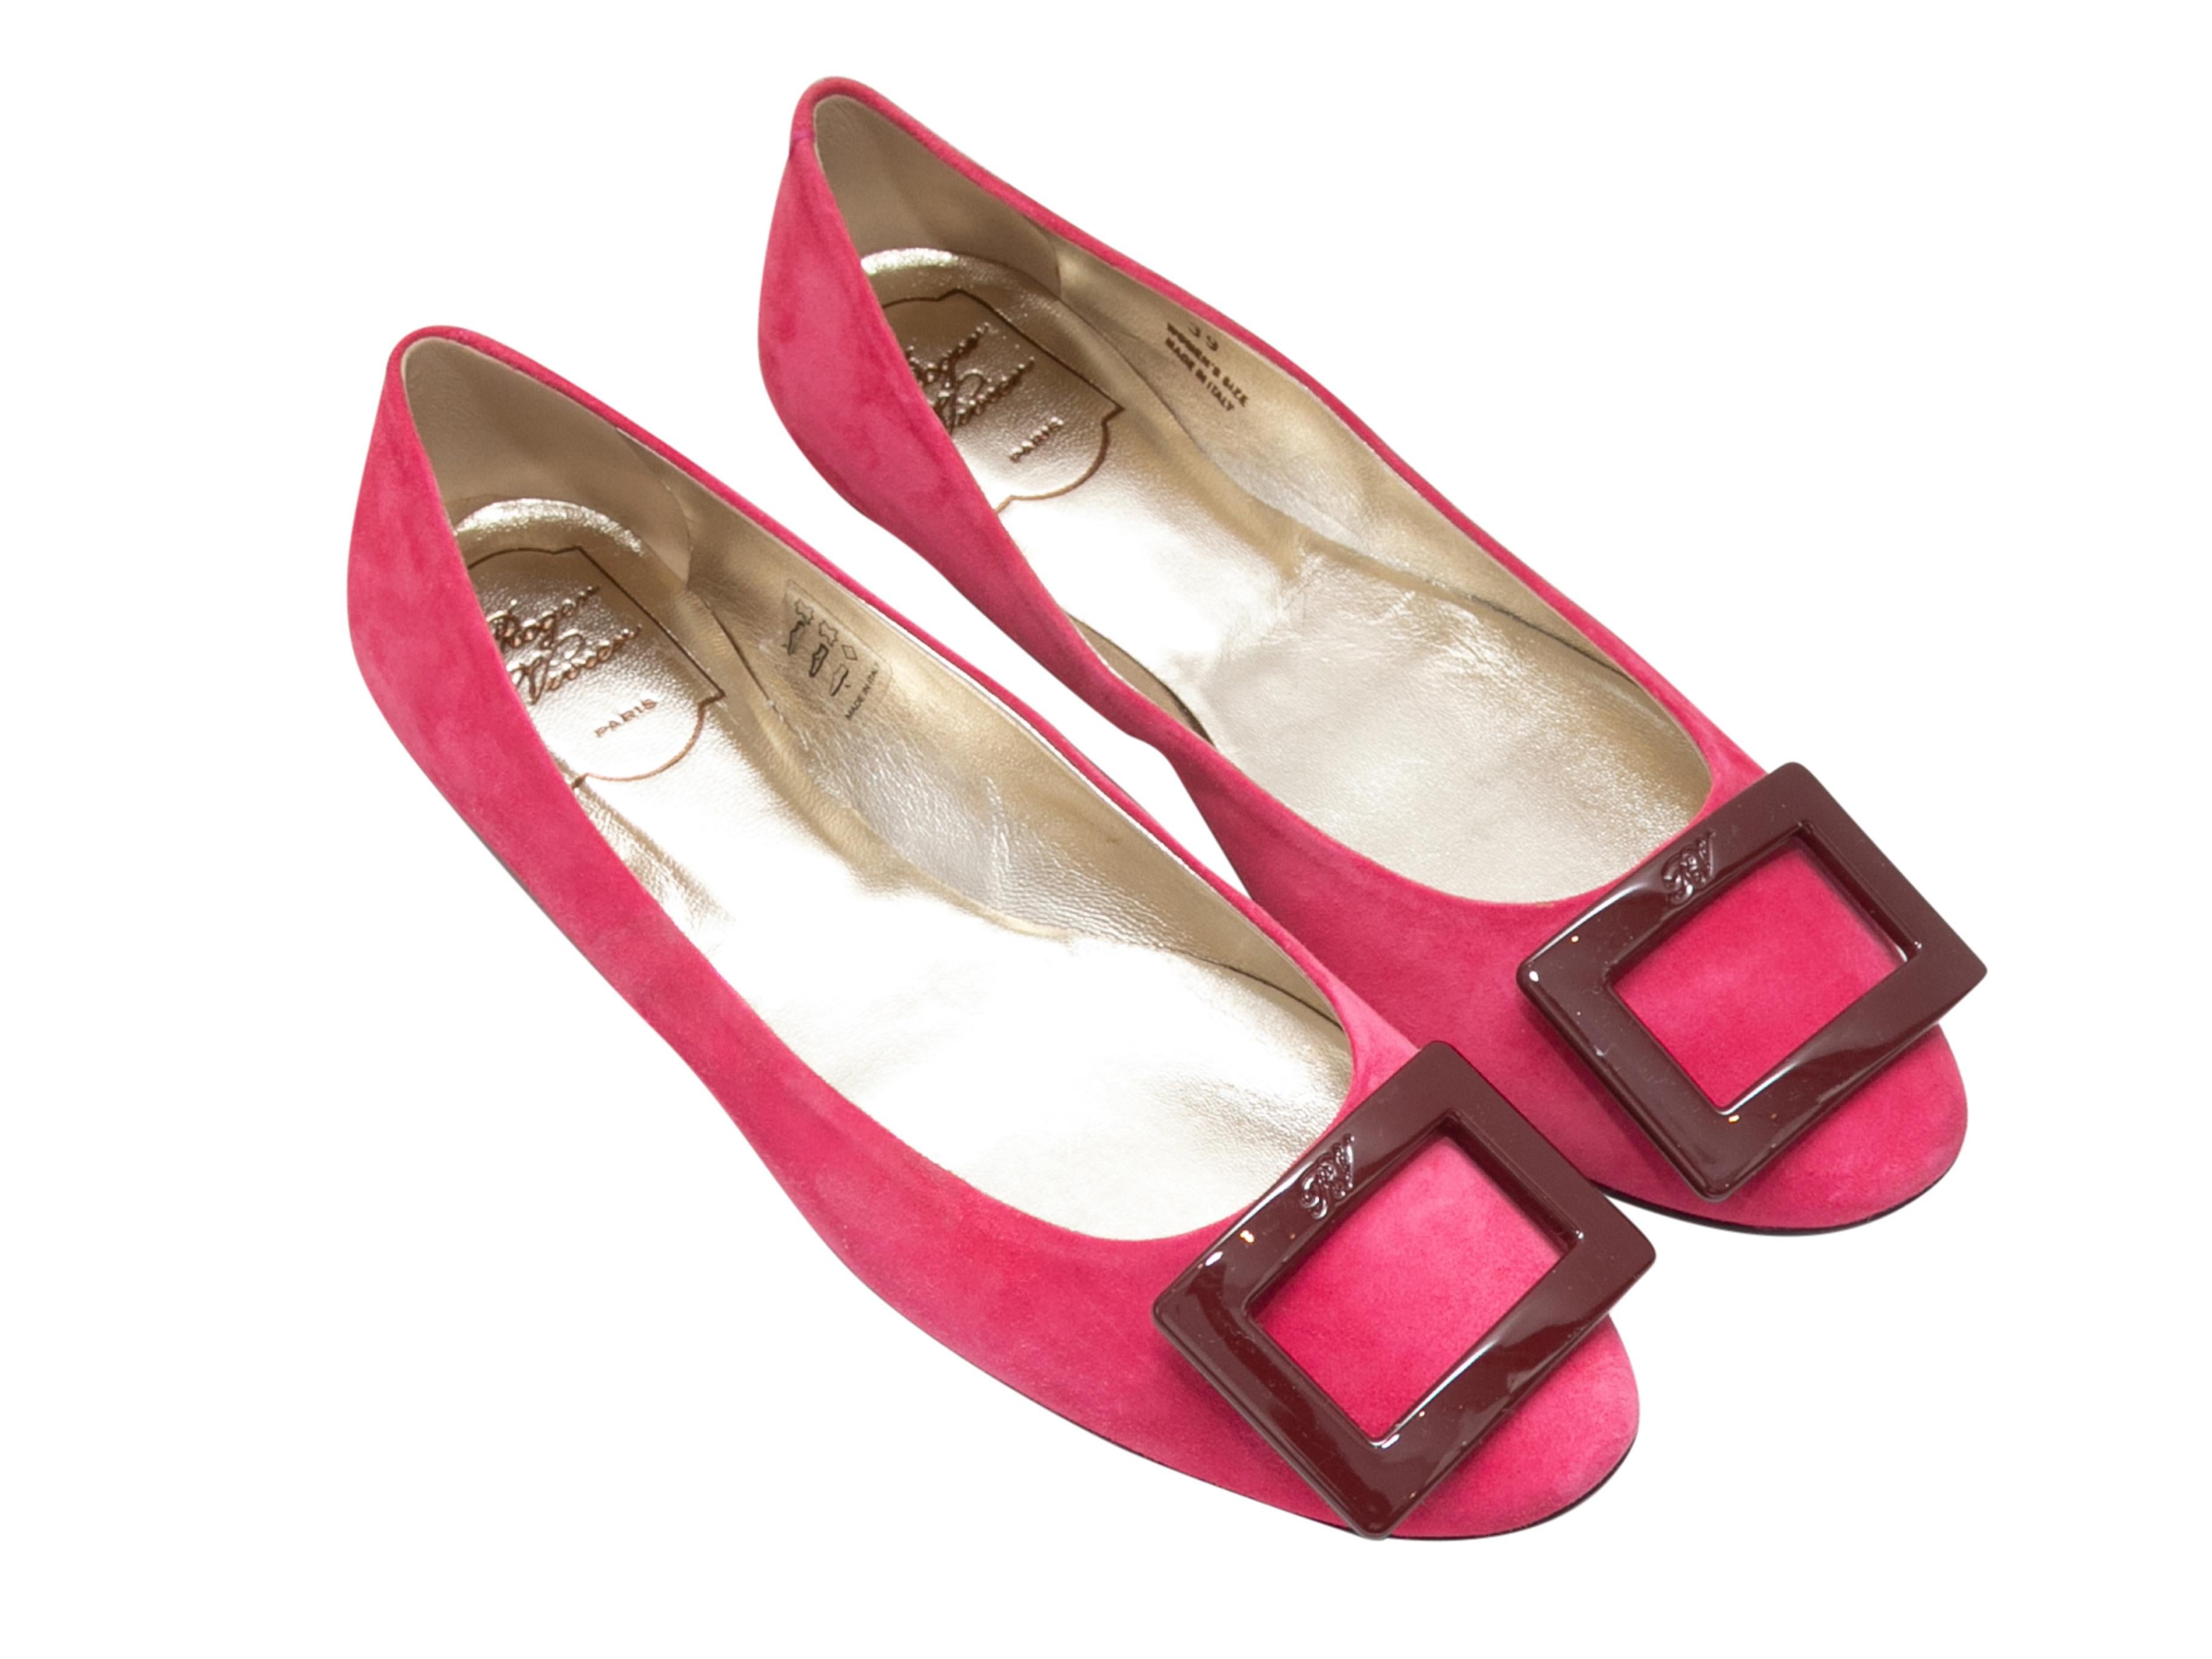 Fuchsia and burgundy suede Gommette ballet flats by Roger Vivier. Buckle accents at tops.